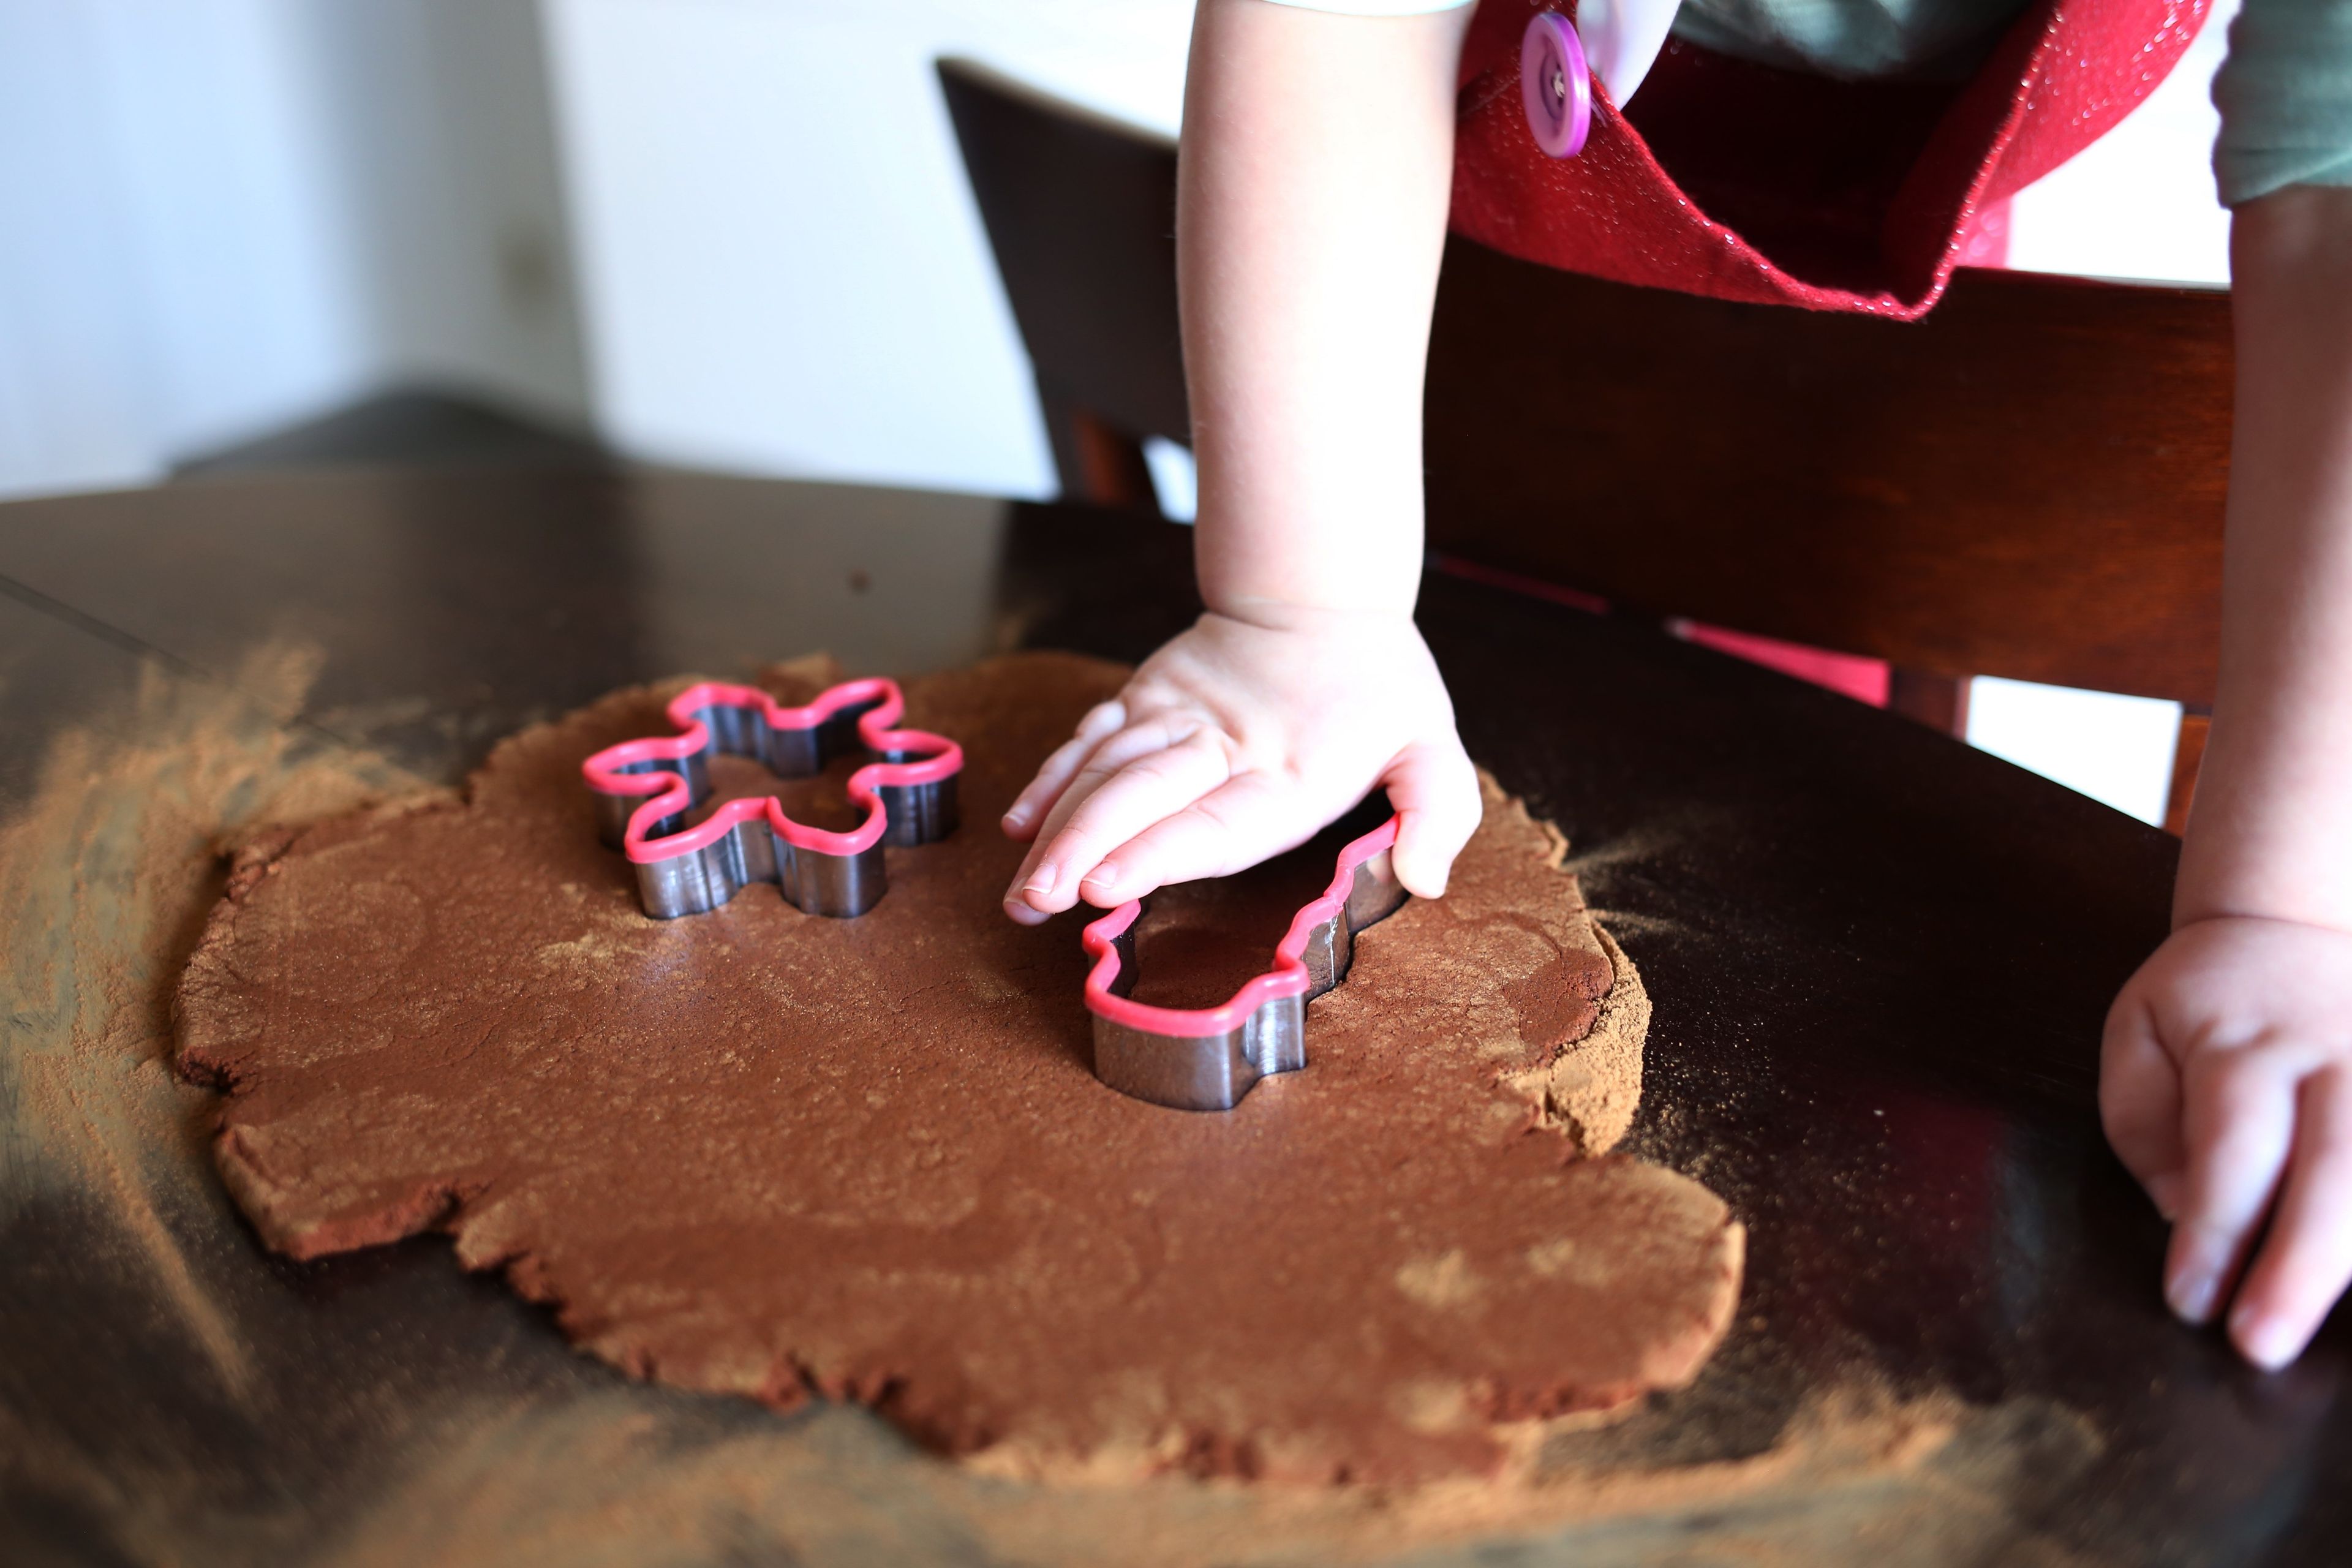 A young child using cookie cutters to cut out Christmas cookies.